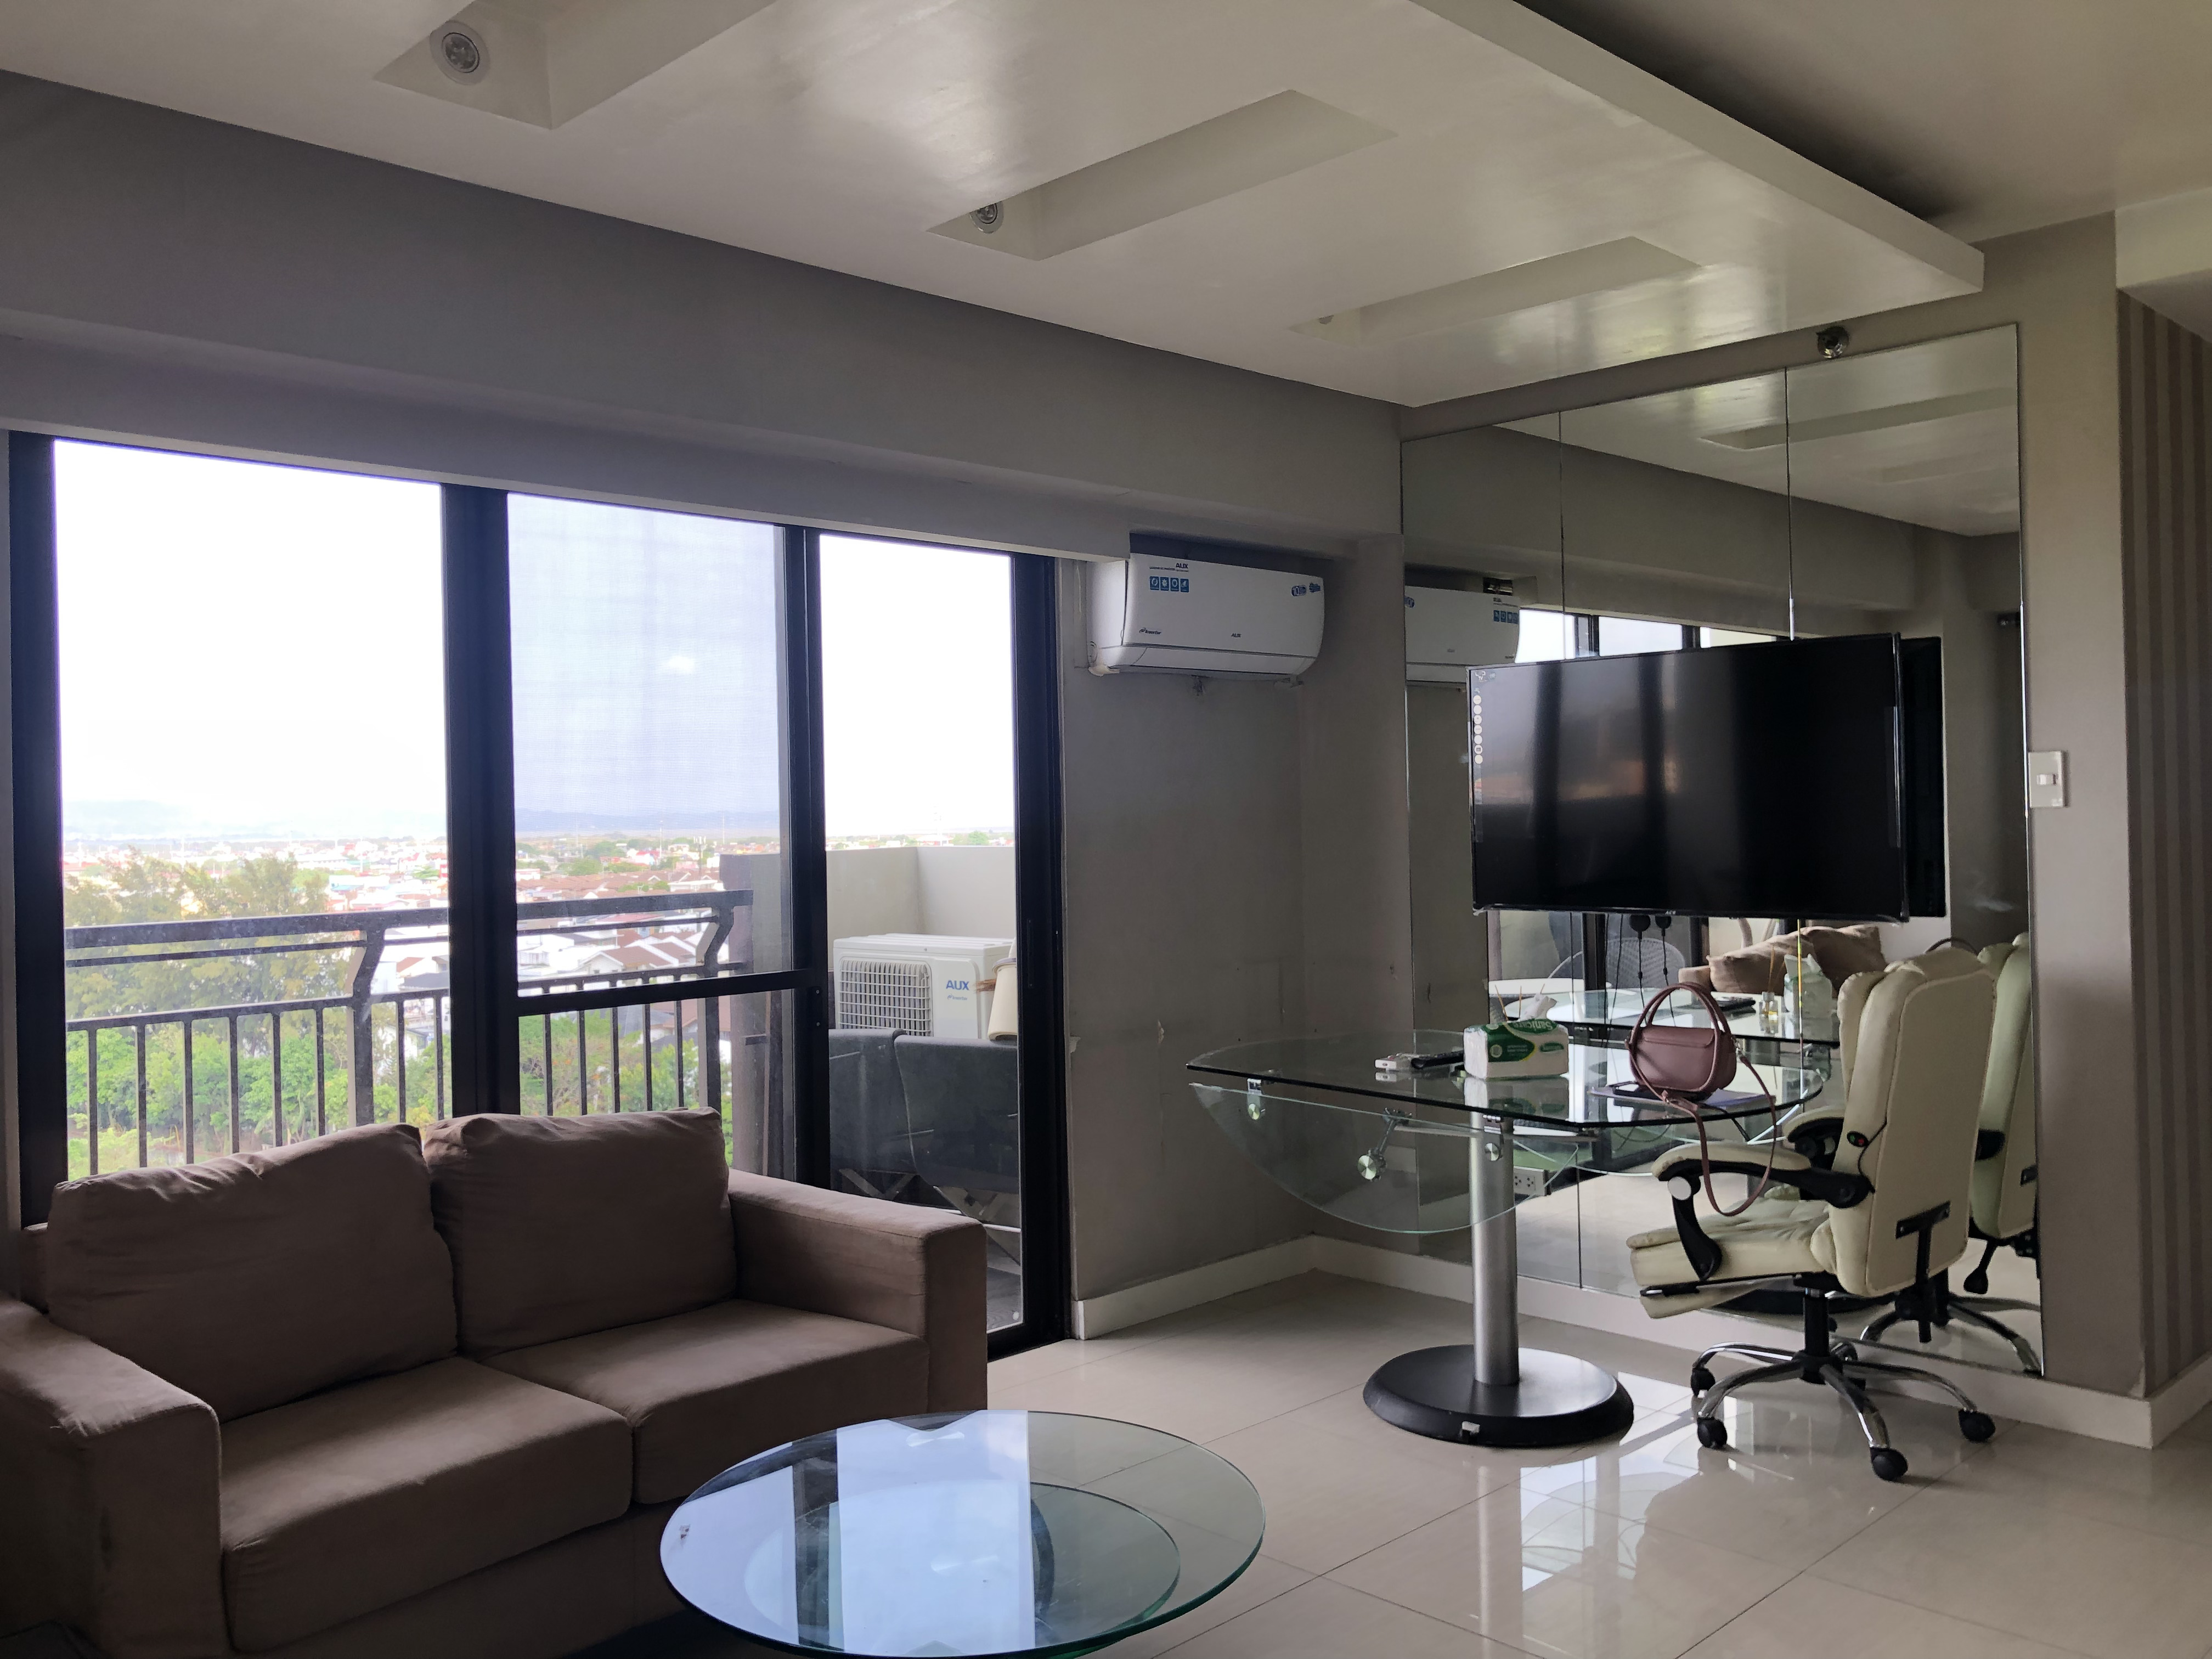 2 Bedroom Condominium Unit For Sale at Royal Palm residence